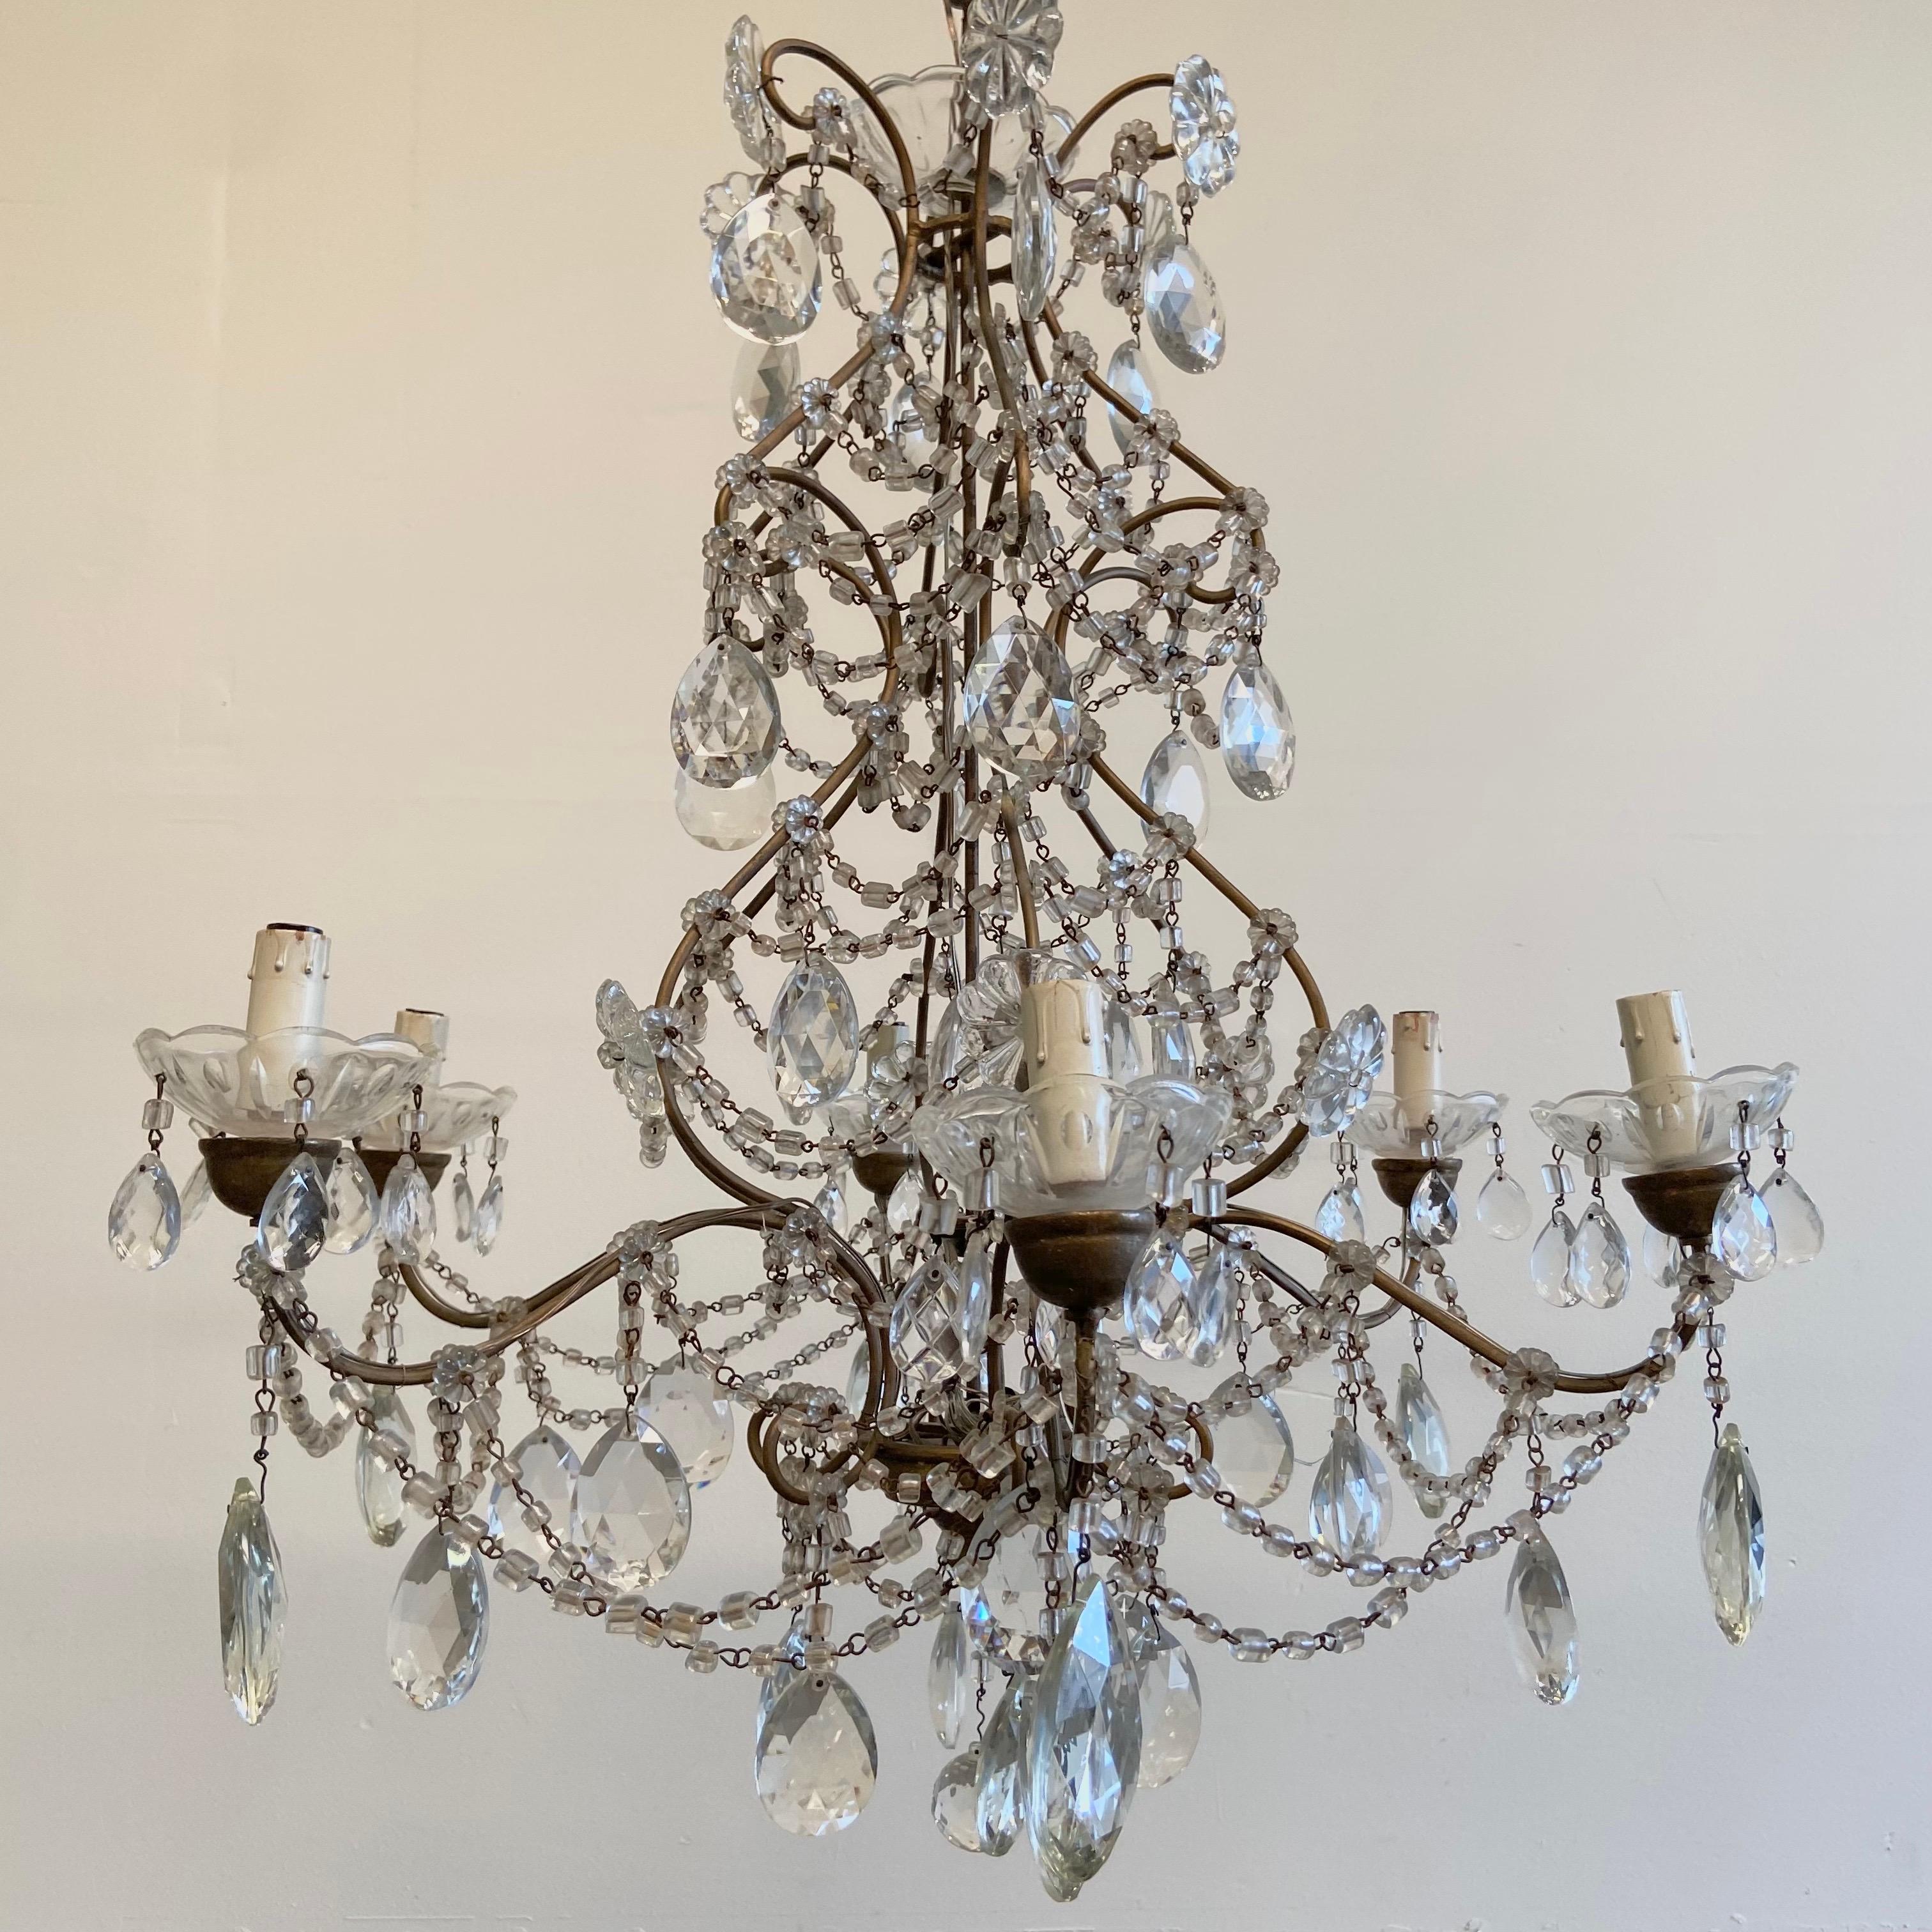 6 light chandelier 25” x 25” x 30”h
Bronze frame, with wood bobeche and glass cups.
Draped in hand cut macaroni beads, and cut glass prisms.
Wood is finished in an aged gilt, and has a dark bronze looking finish.
There is not a ceiling canopy,